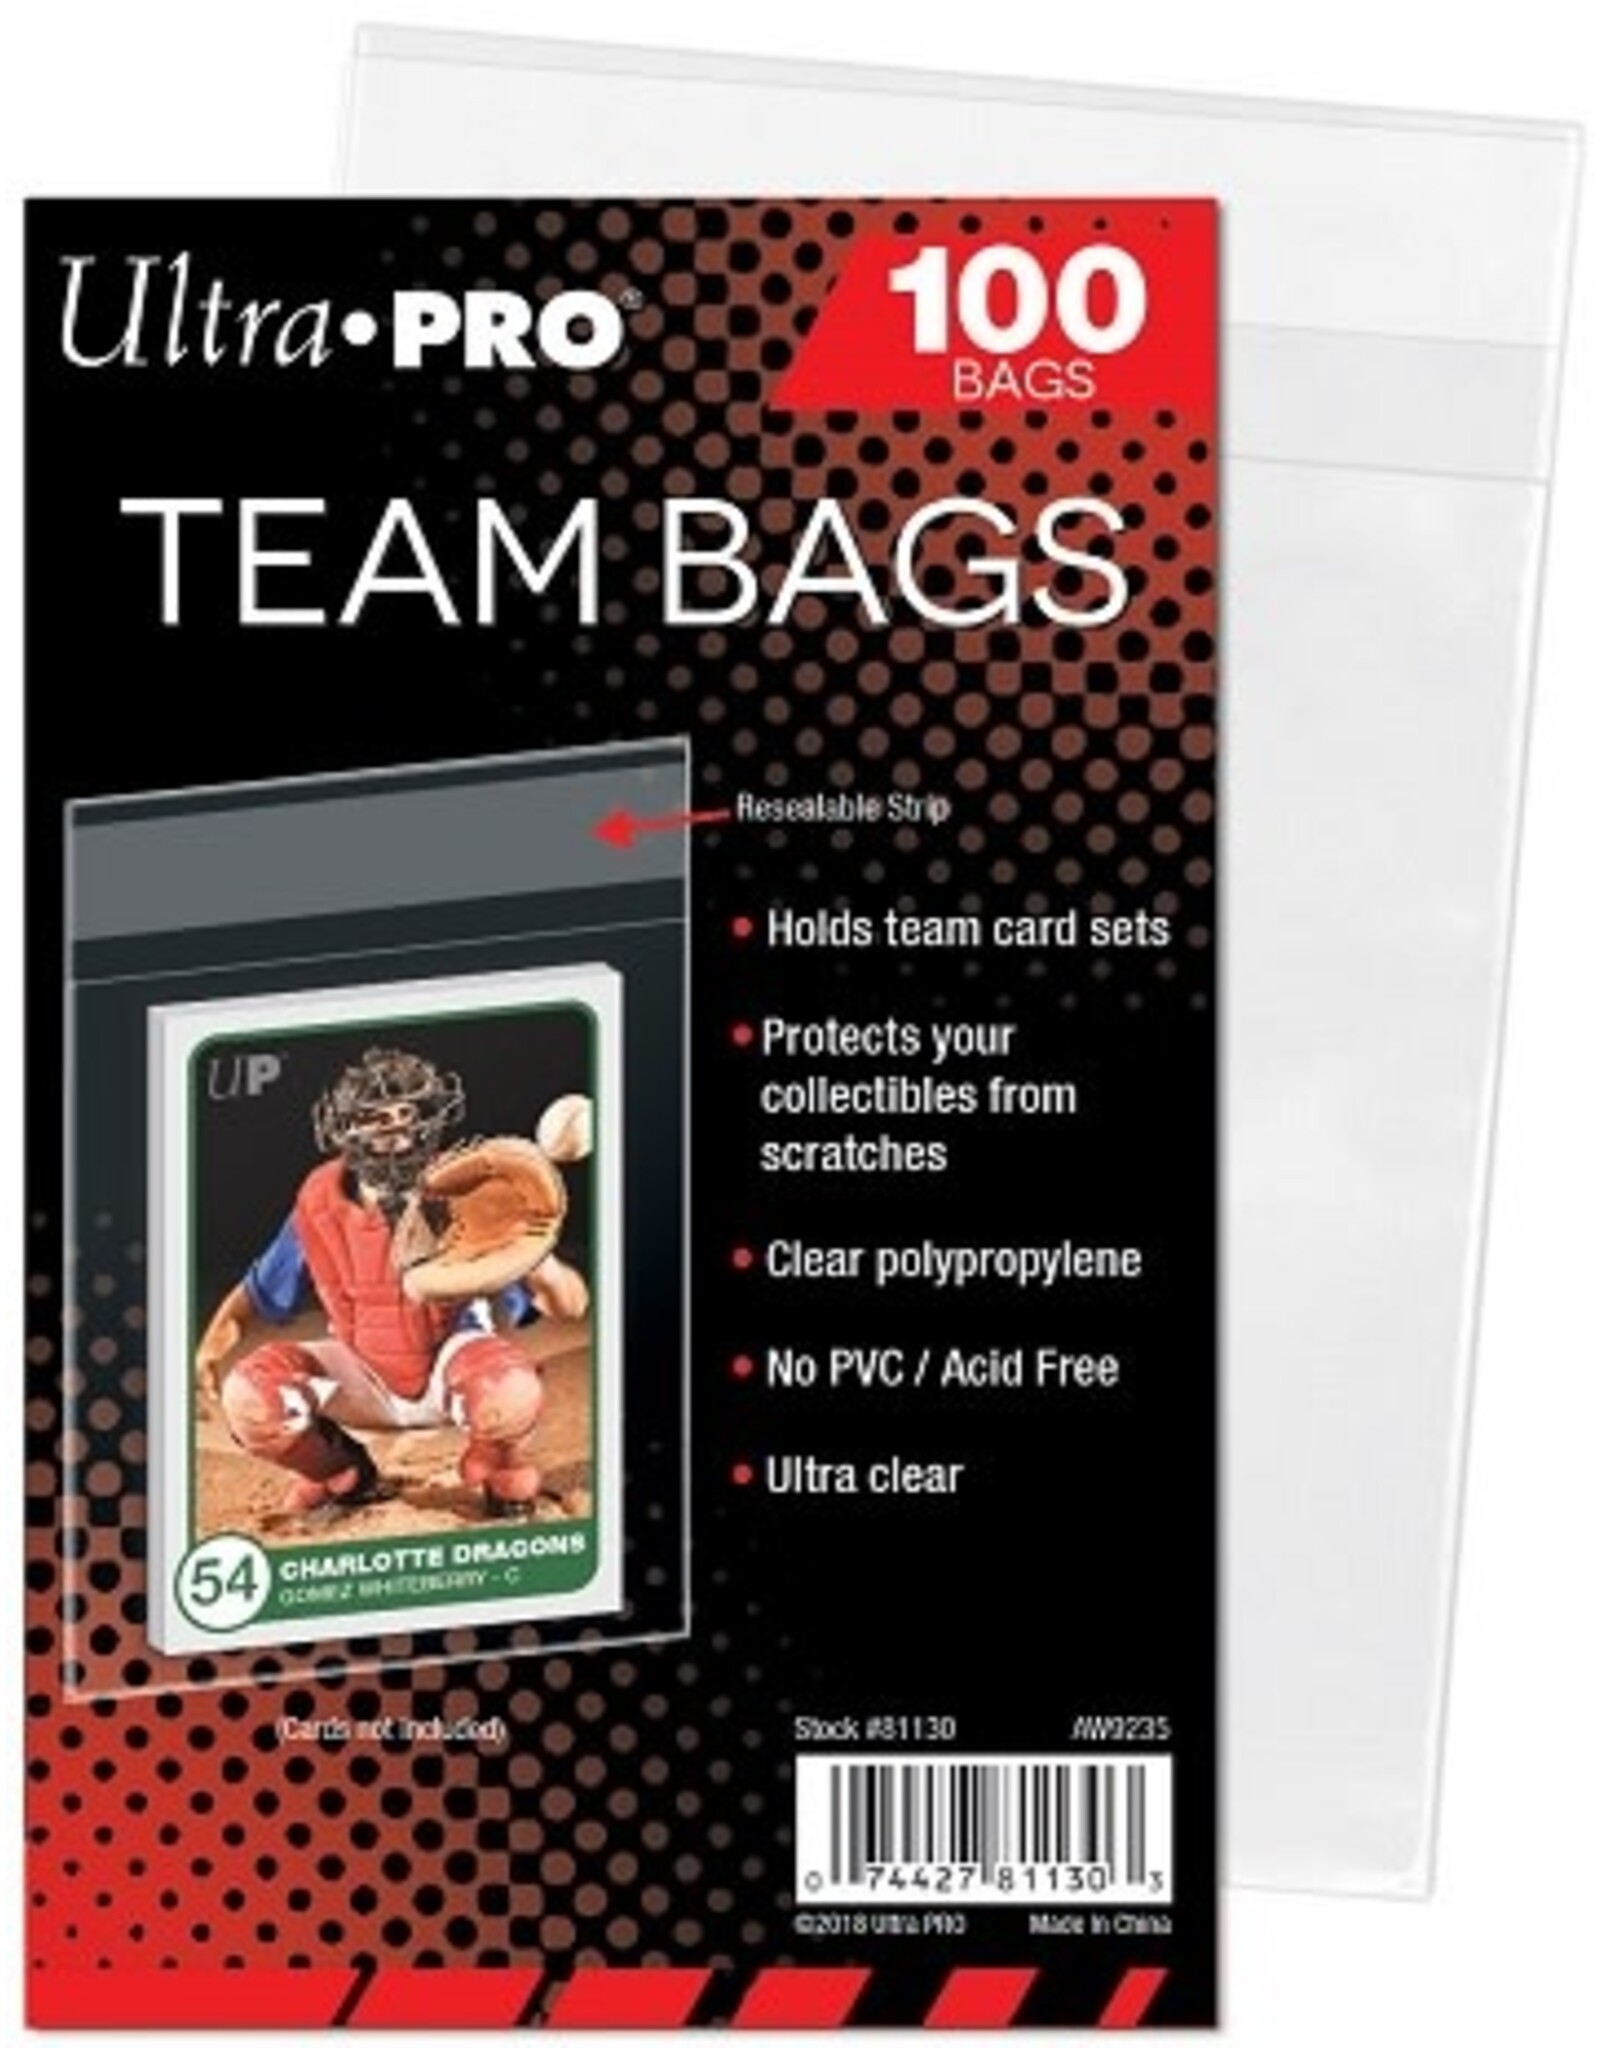 ultra pro Ultra Pro - Resealable Team Bags